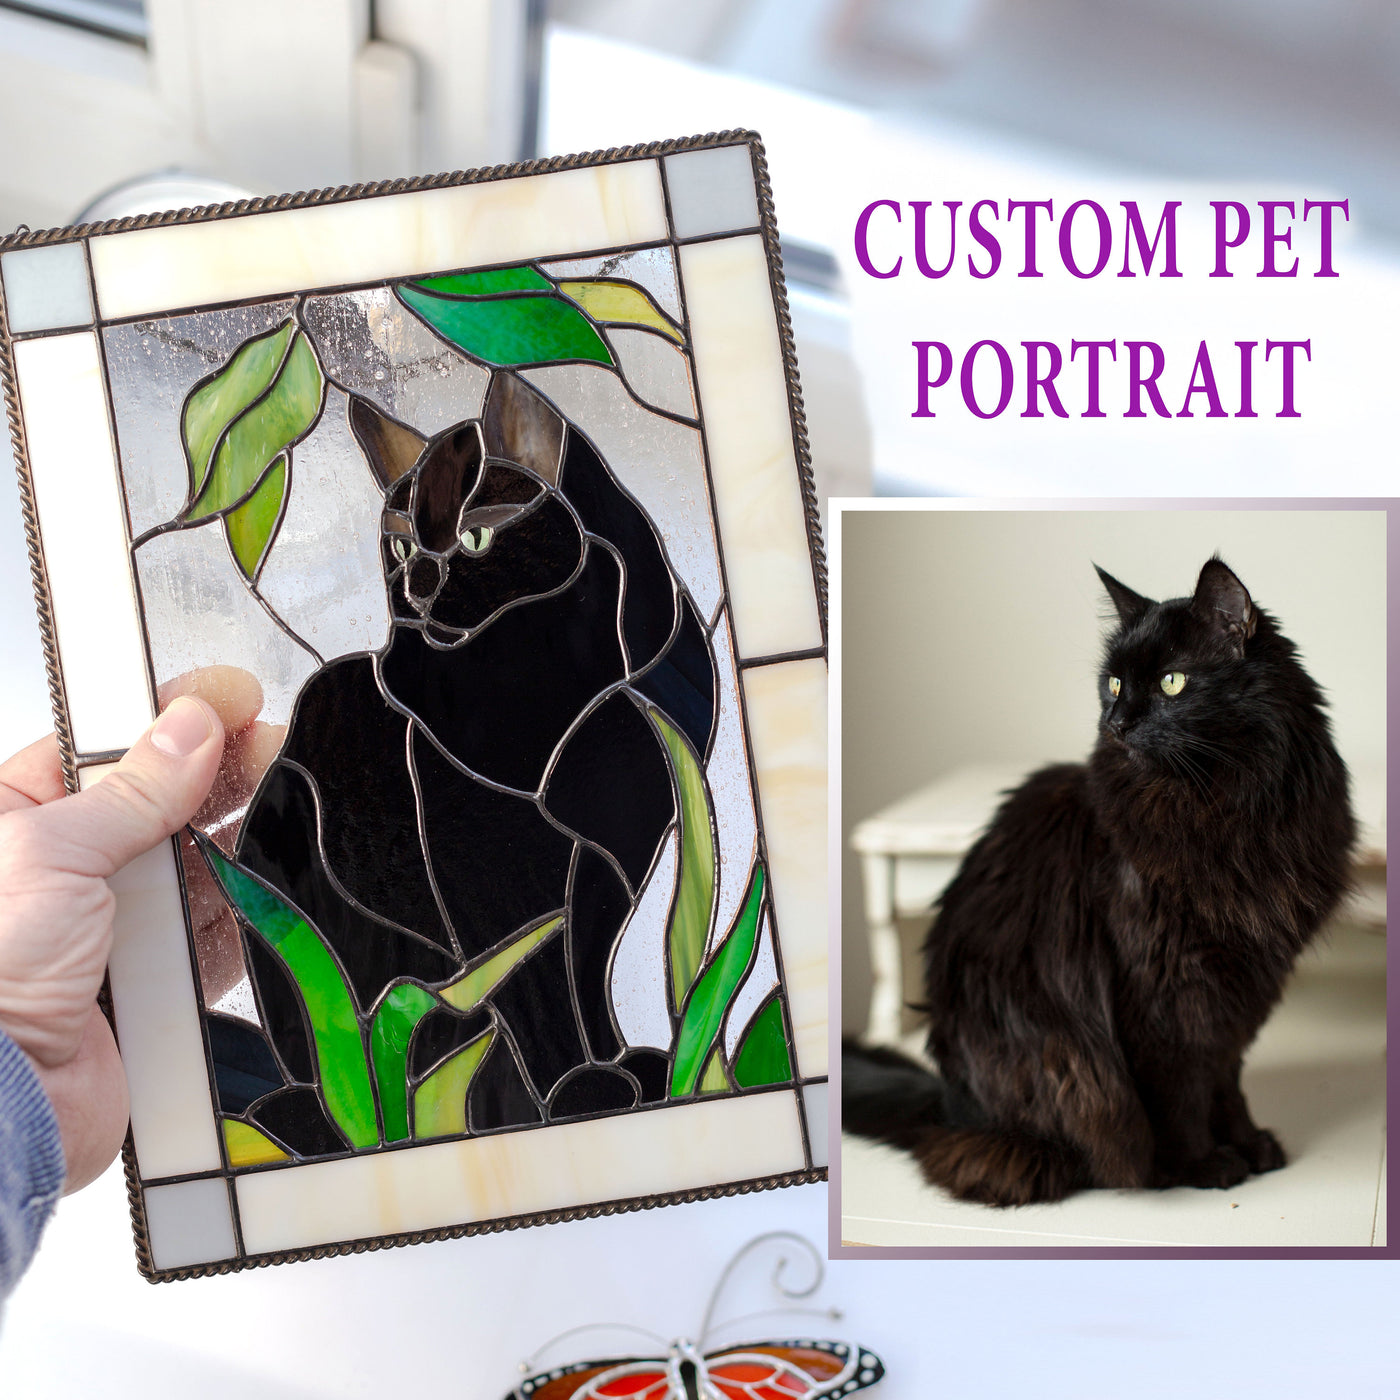 Stained glass rectangular portrait panel depicting a black pet